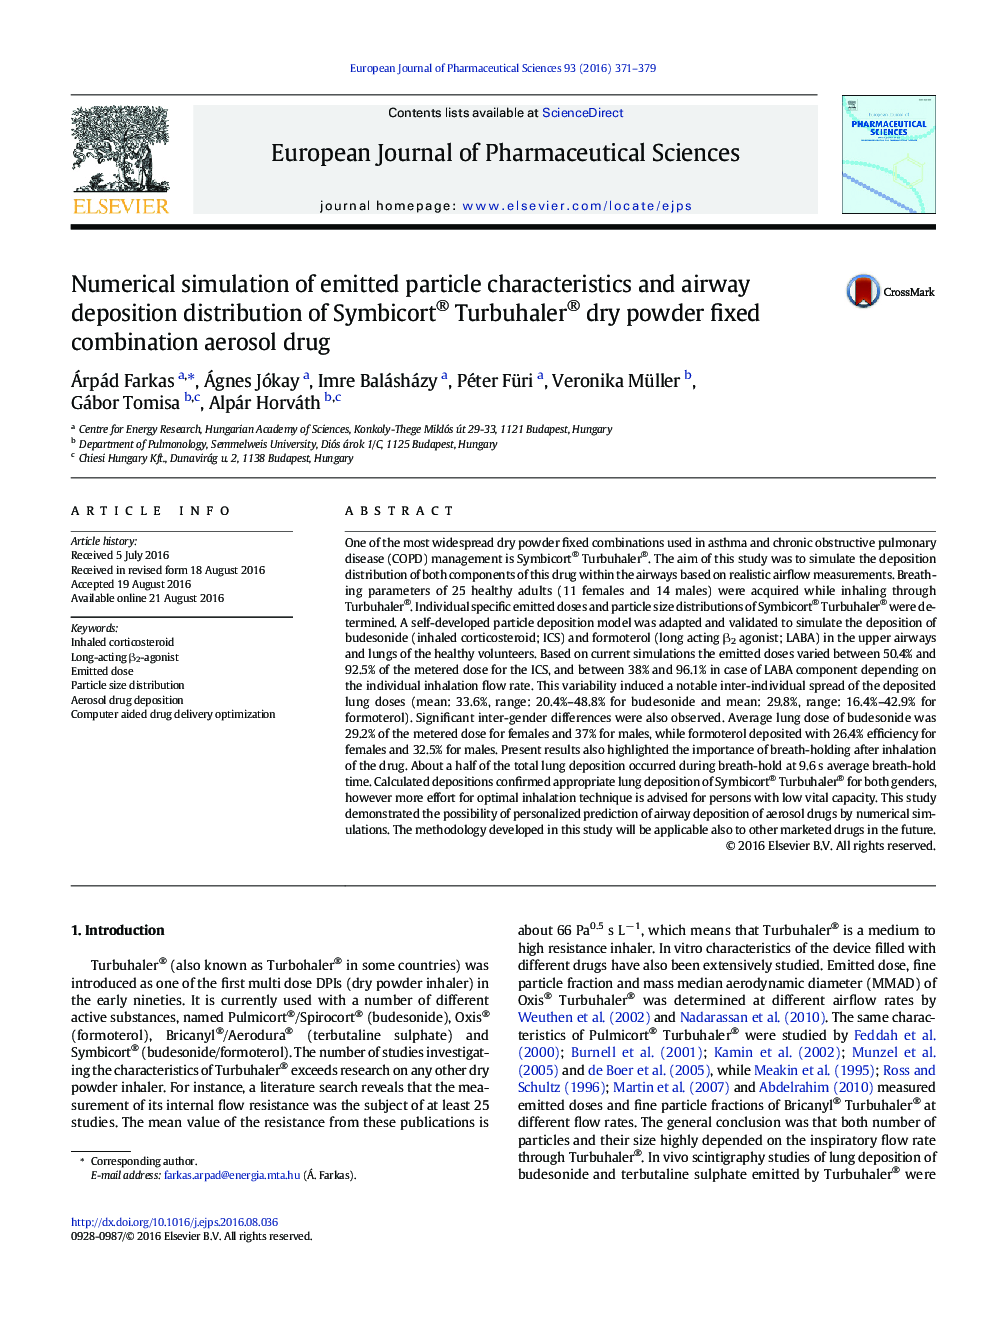 Numerical simulation of emitted particle characteristics and airway deposition distribution of Symbicort® Turbuhaler® dry powder fixed combination aerosol drug